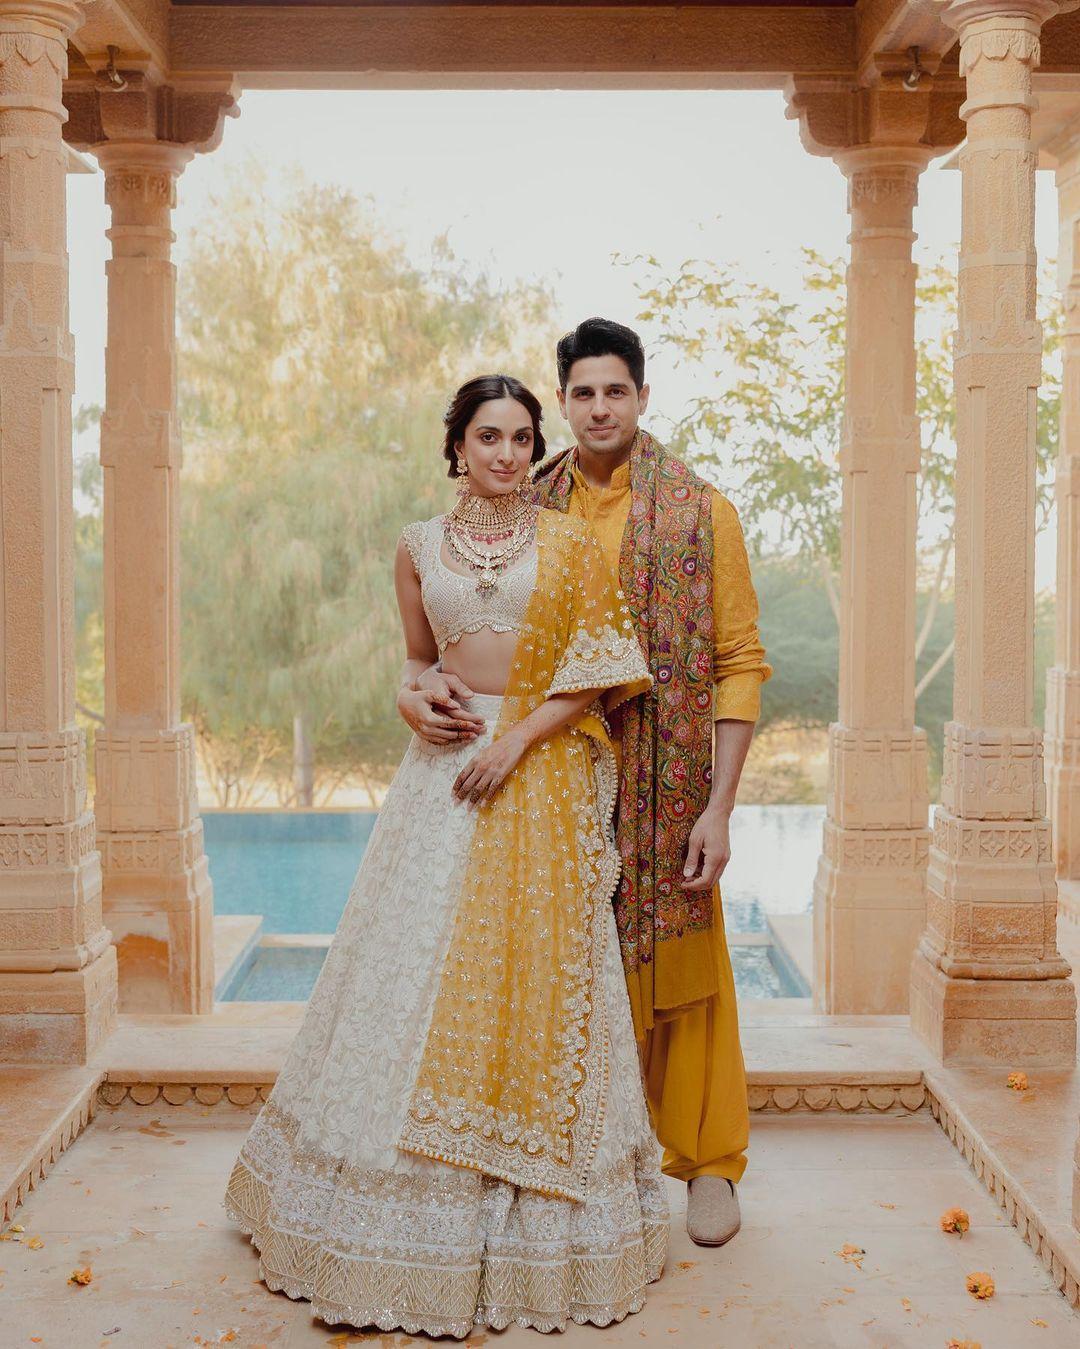 Kiara Advani wore a light-colored beige cream for her Mehendi ceremony. The actress paired her lehenga with a bright yellow dupatta and wore a stylish heavy necklace which had pink gems to it. While Sidharth Malhotra complemented his lady love in a yellow Pathani paired with a printed shawl